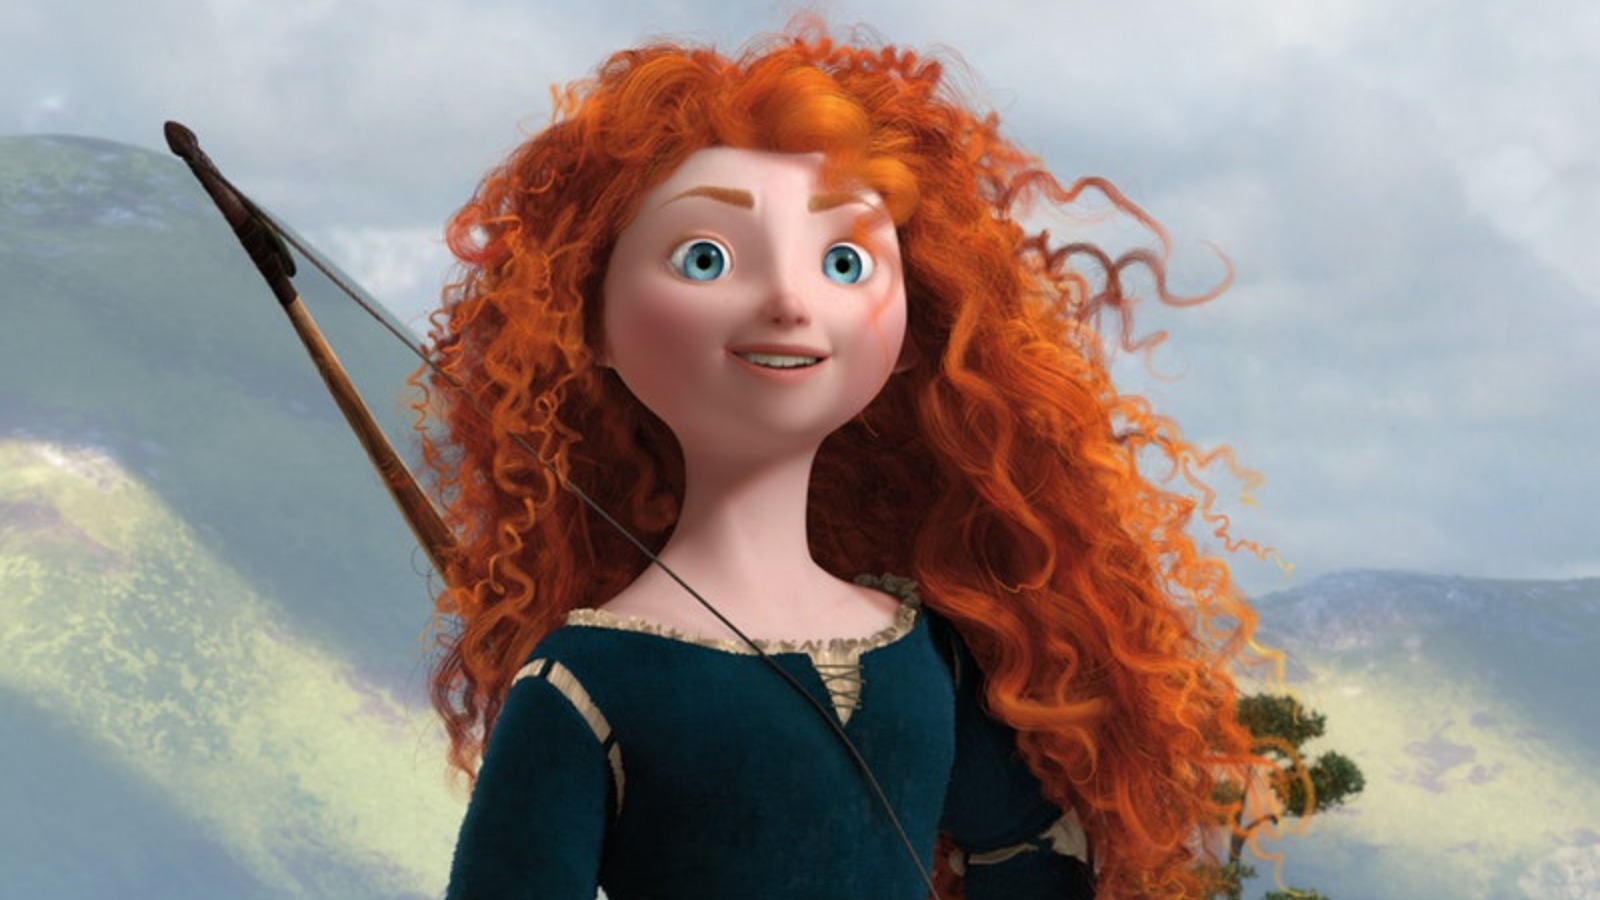 Brave 2: Will We Ever Get To See The Sequel?